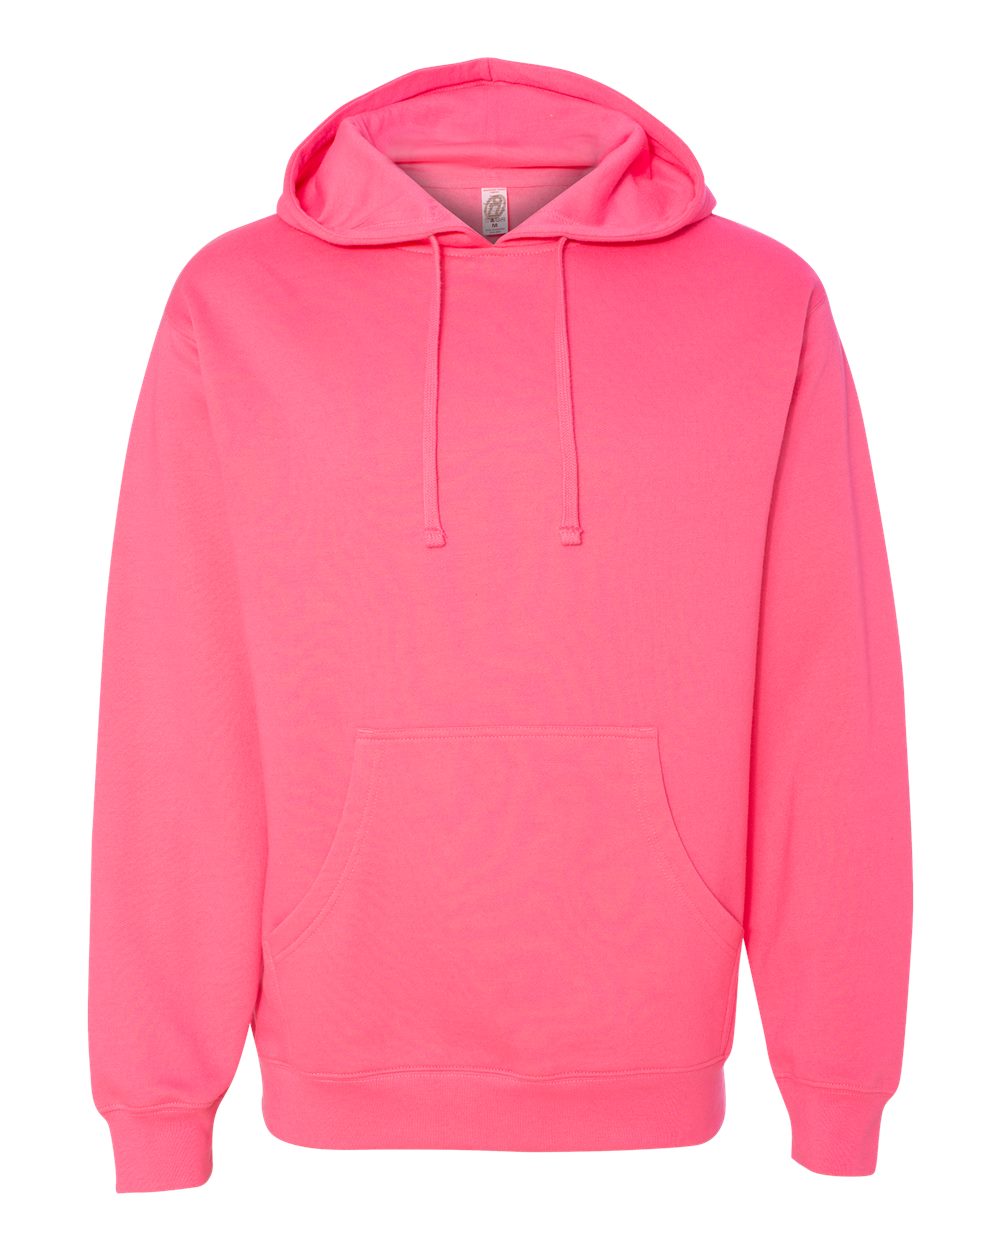 Independent Trading Co. - Midweight Hooded Sweatshirt - SS4500 XS - 5XL